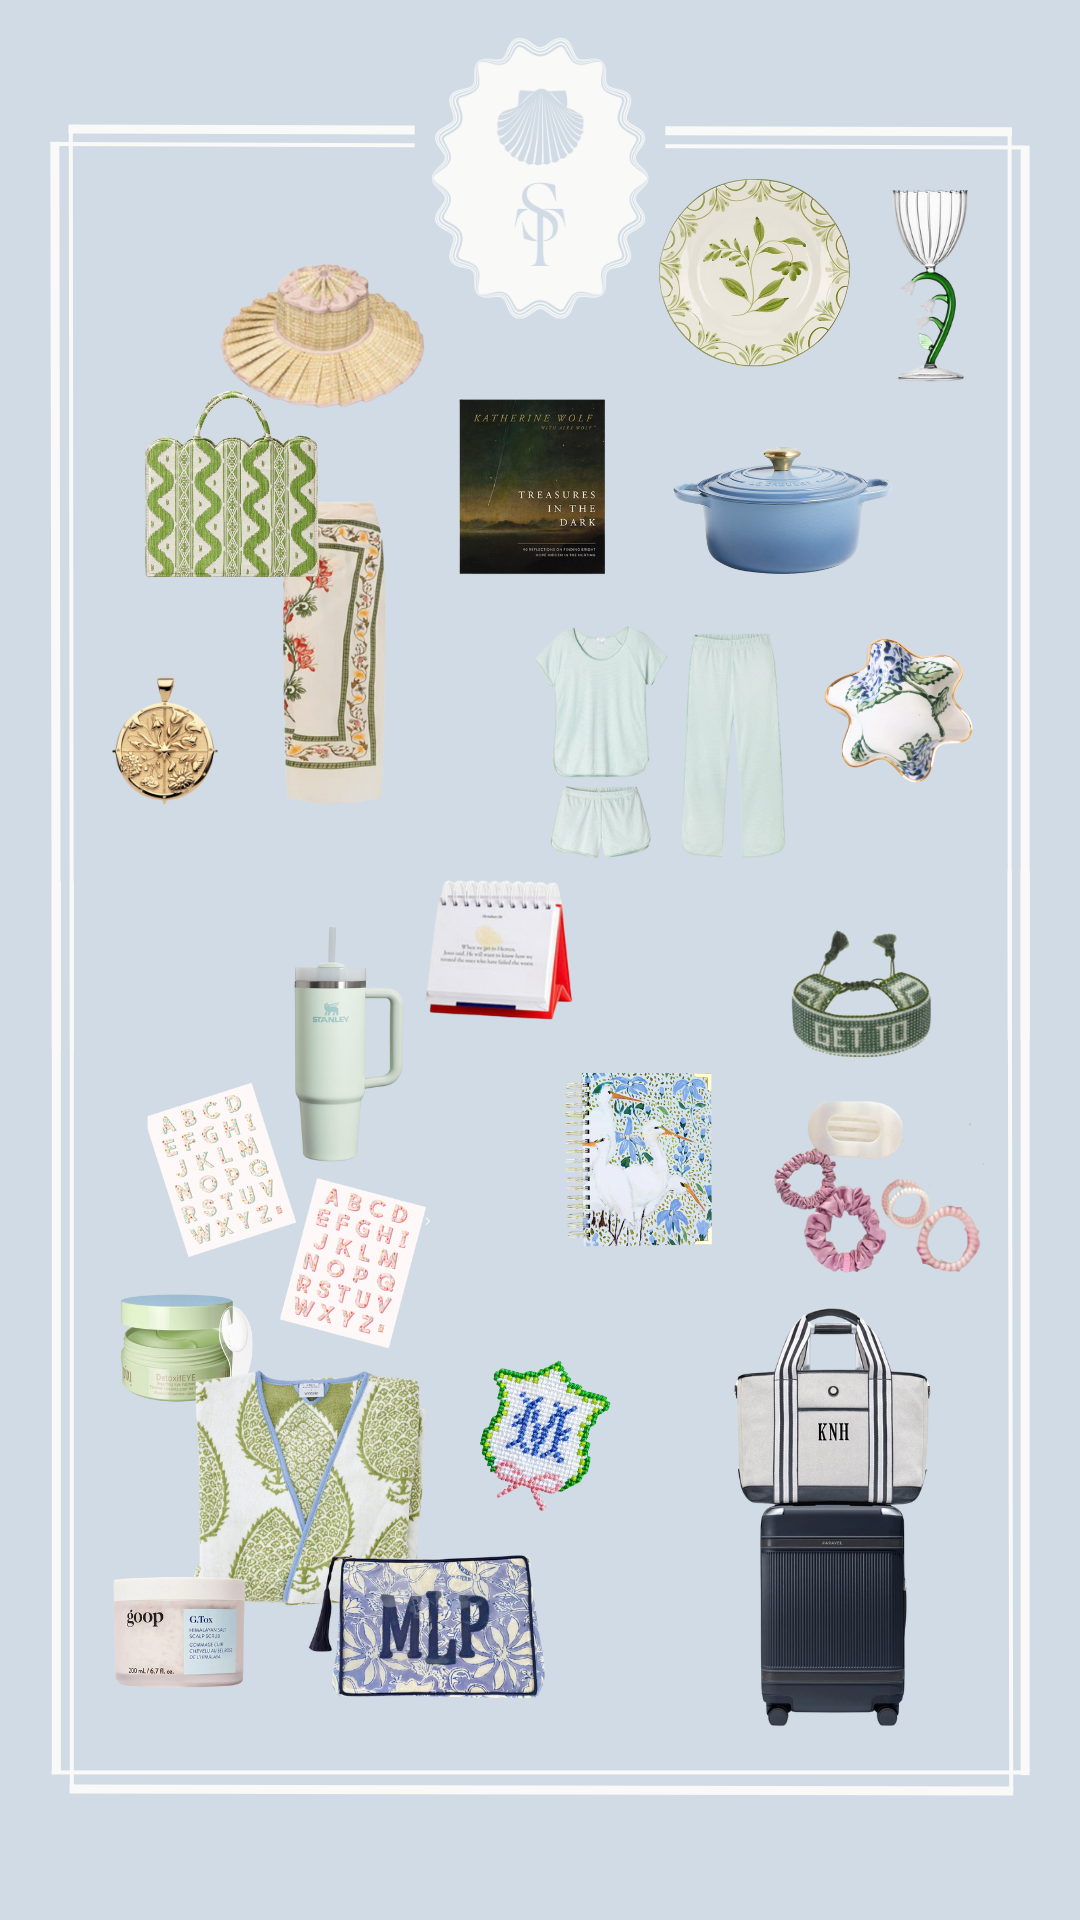 Preppy thoughtful sweet mother's day gifts